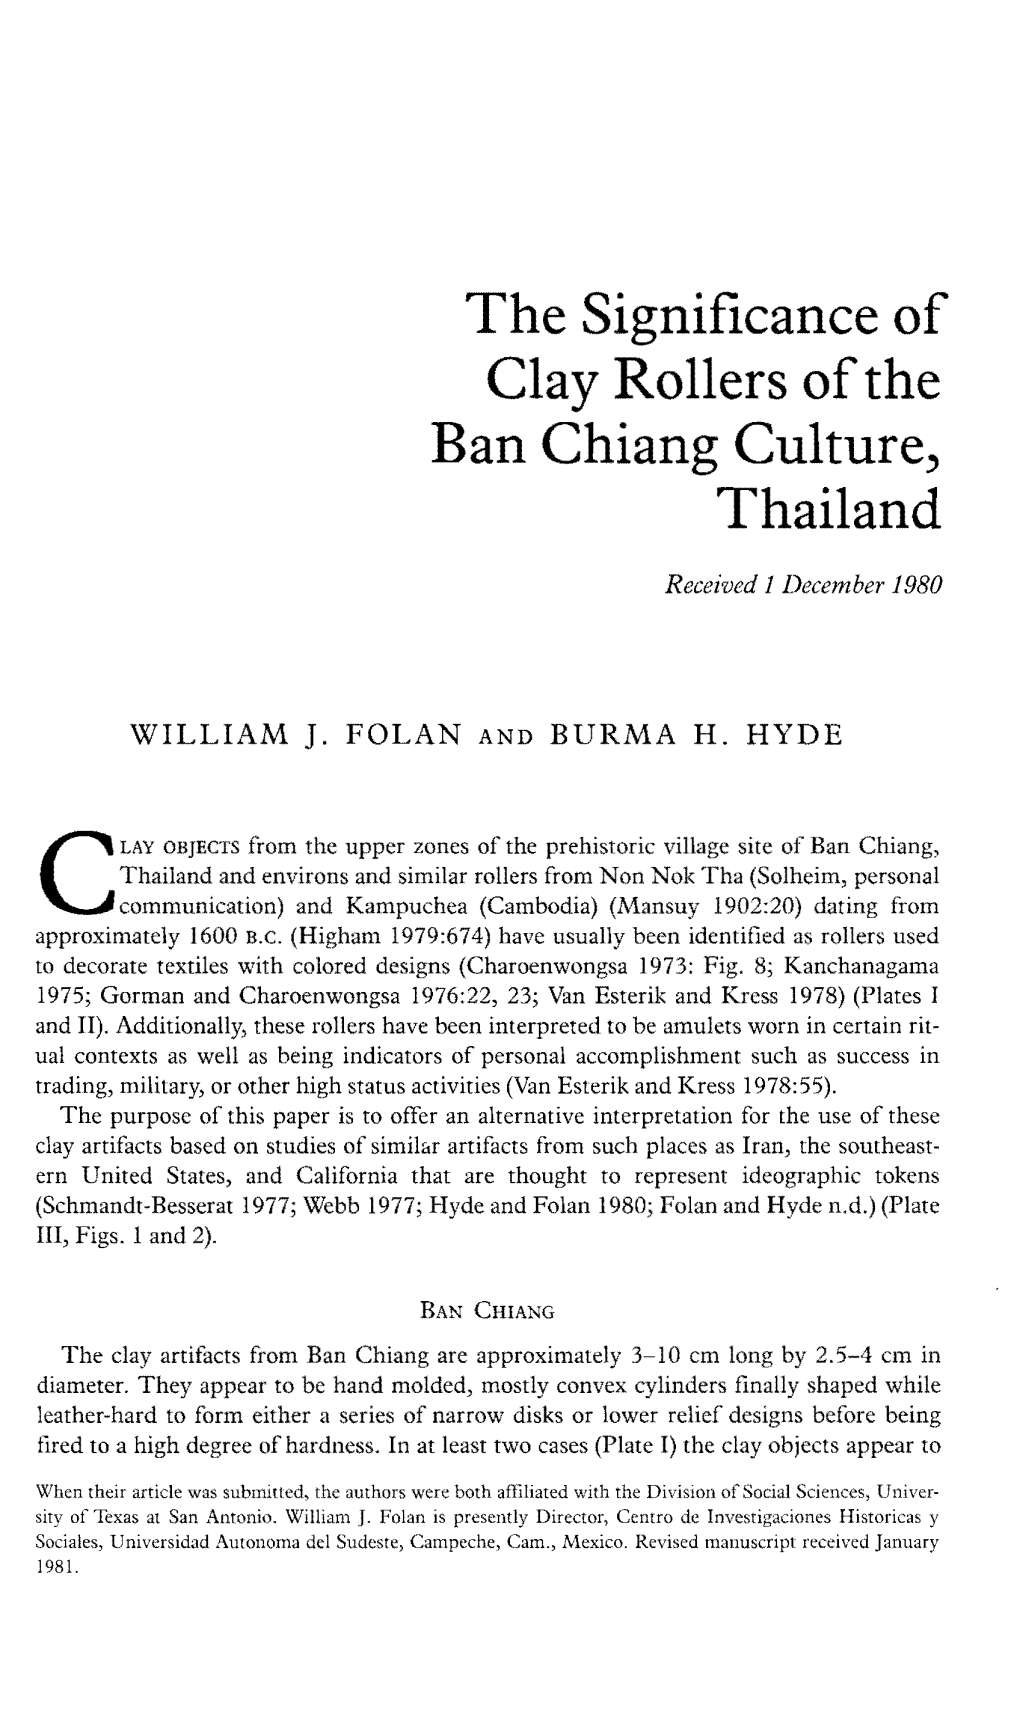 The Significance of Clay Rollers of the Ban Chiang Culture, Thailand